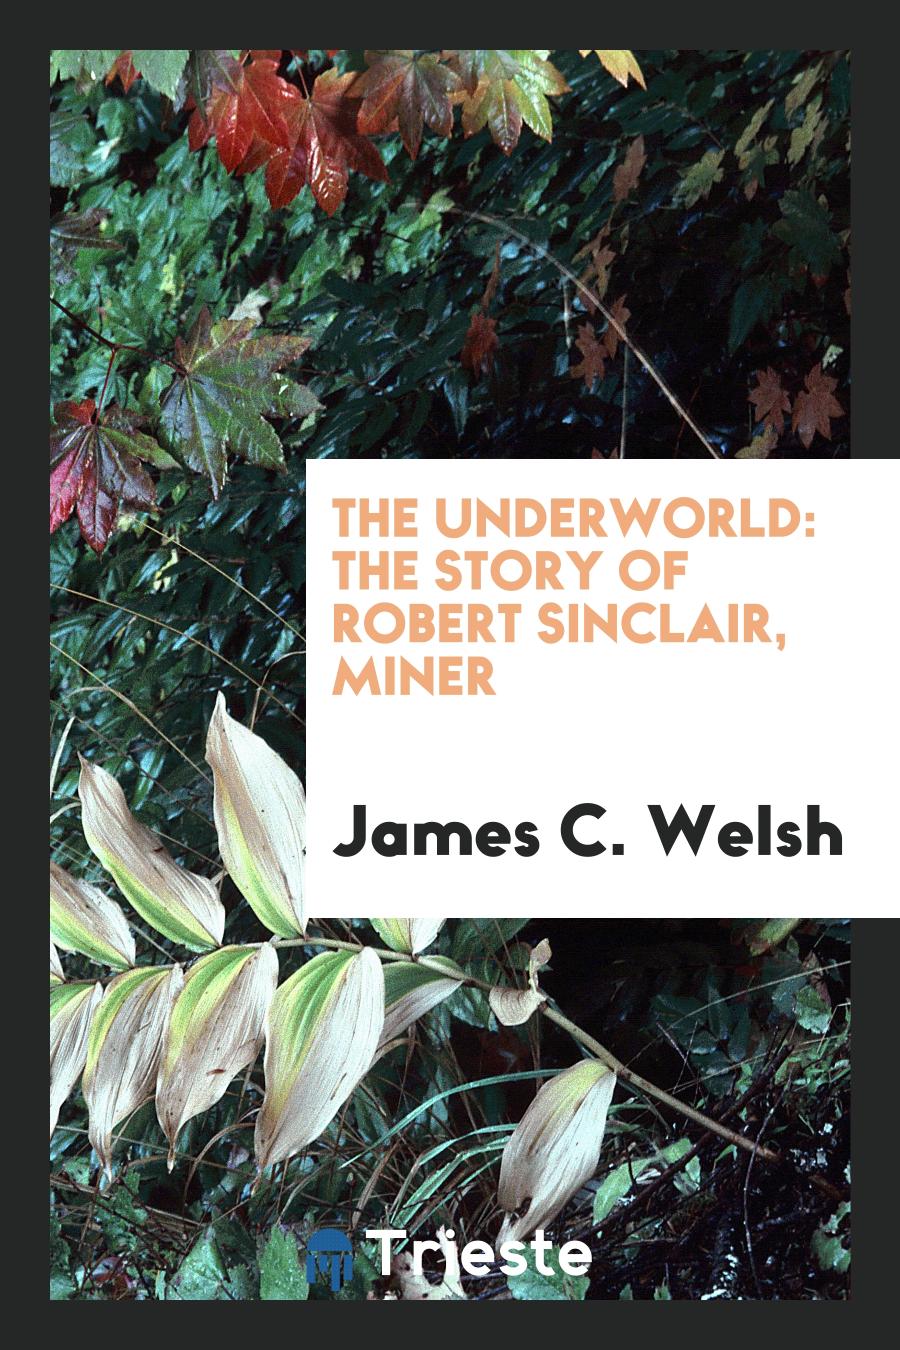 The Underworld: The Story of Robert Sinclair, Miner